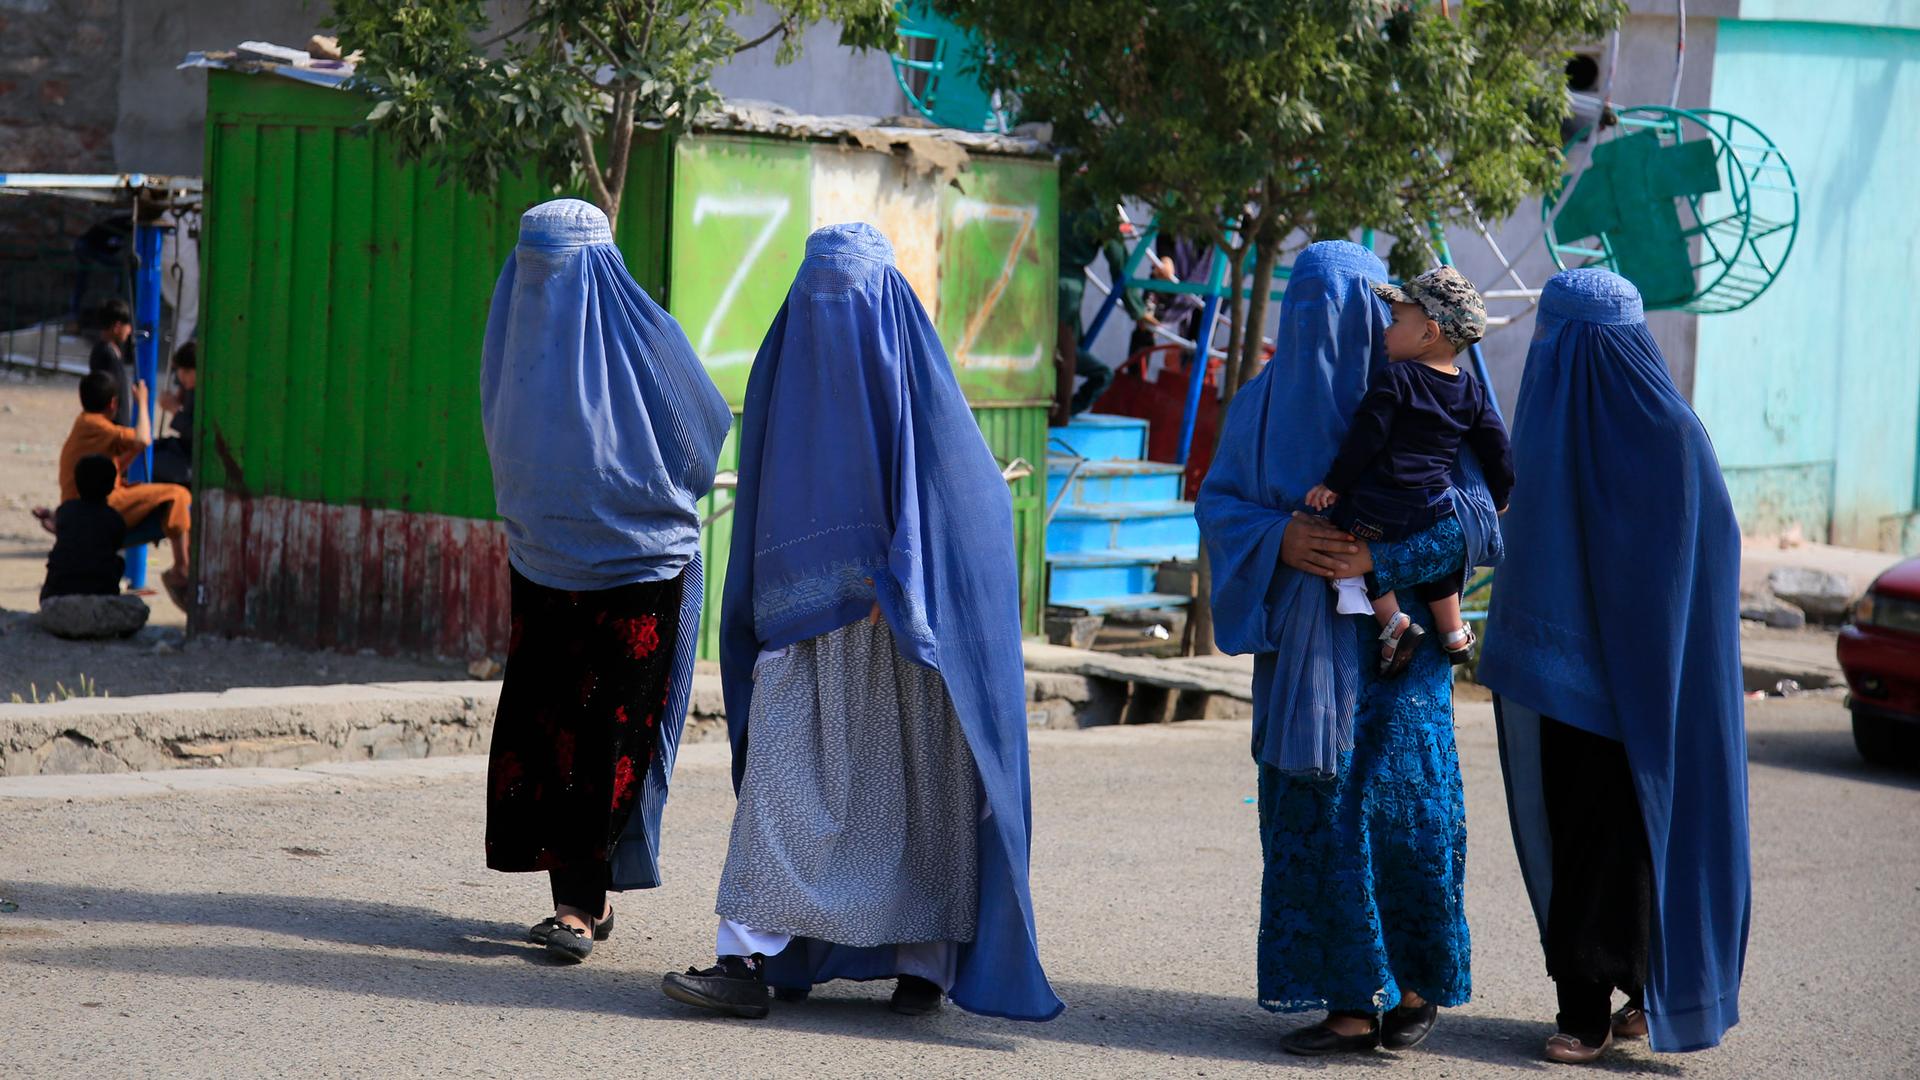 Afghan women walk on the road in Kabul, Afghanistan, Thursday, May 13, 2021.